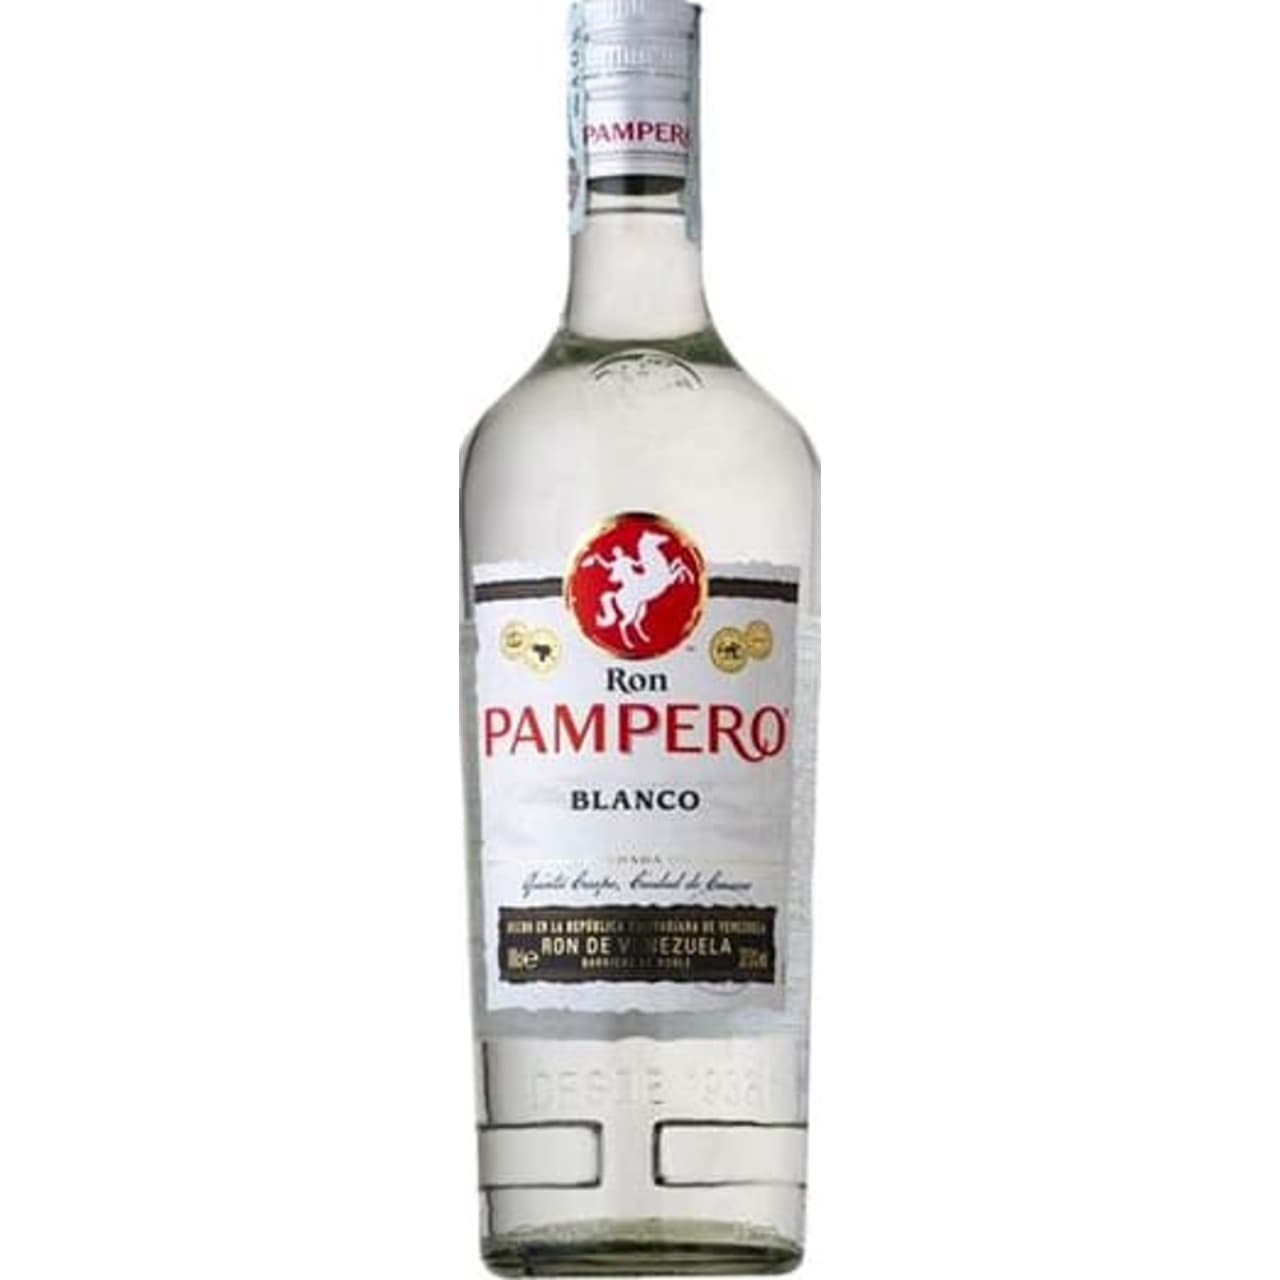 Pampero Blanco is a fresh, clean, sweet and fruity white rum. It is a light tasting rum not as full of flavour as you might expect. A silky creaminess on the tongue with hints of toffee and a little vanilla.